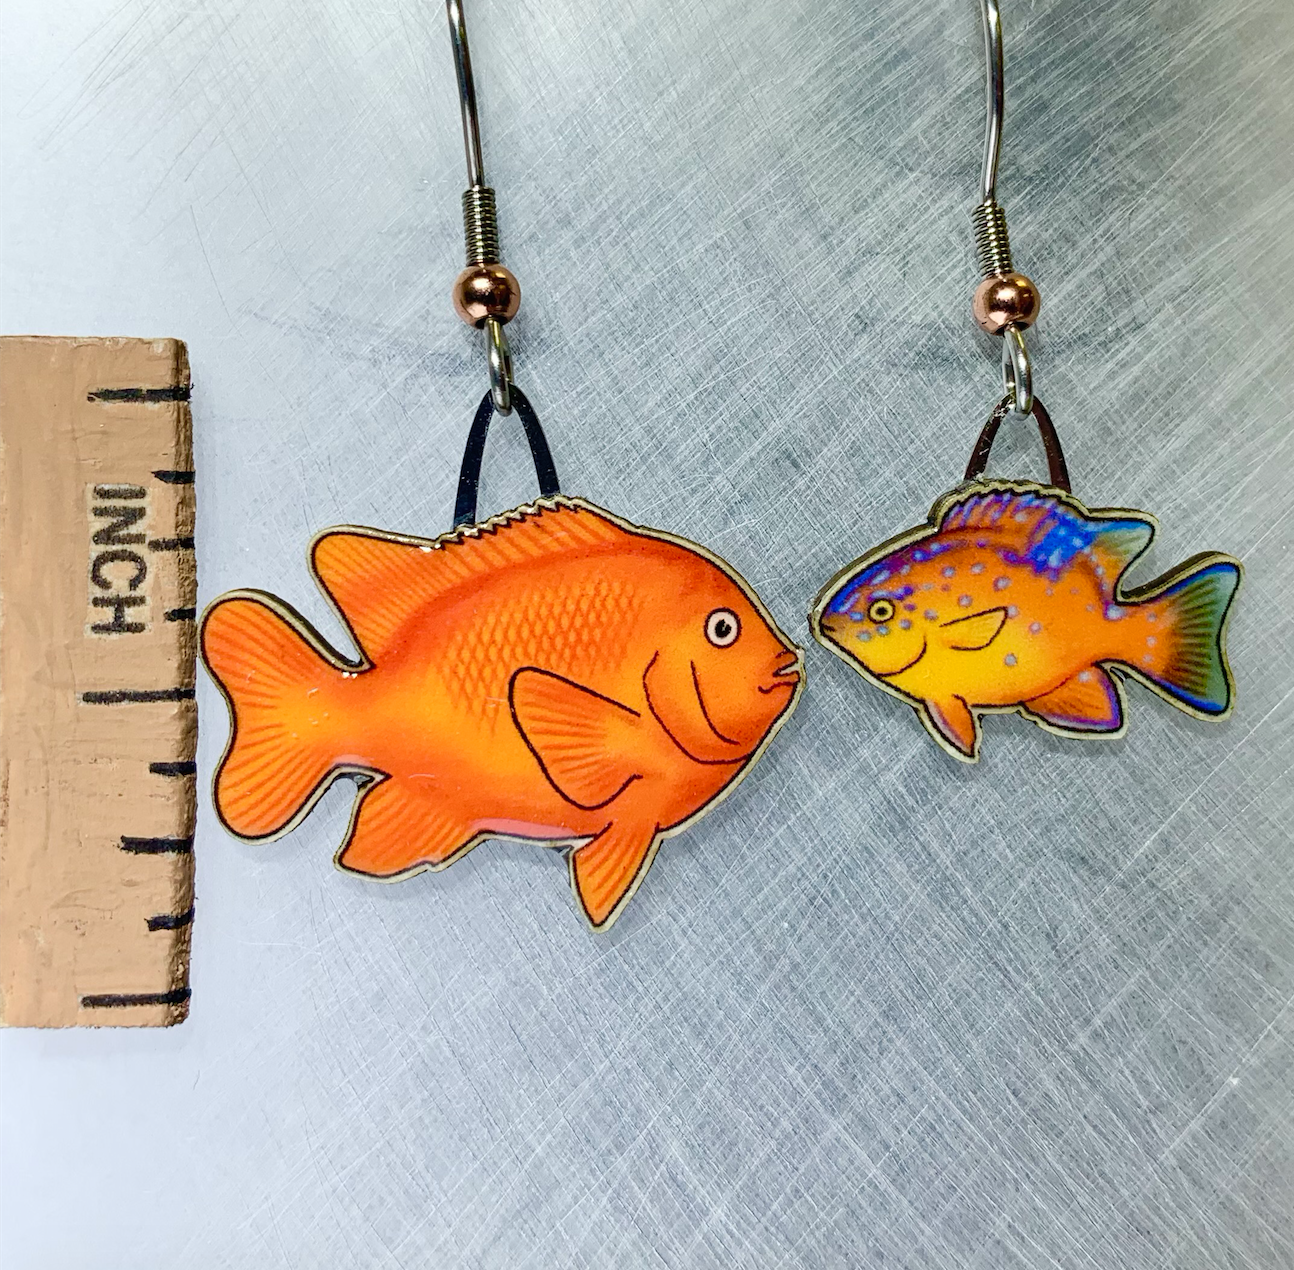 Picture shown is of 1 inch tall pair of earrings of the fish the Garibaldi.